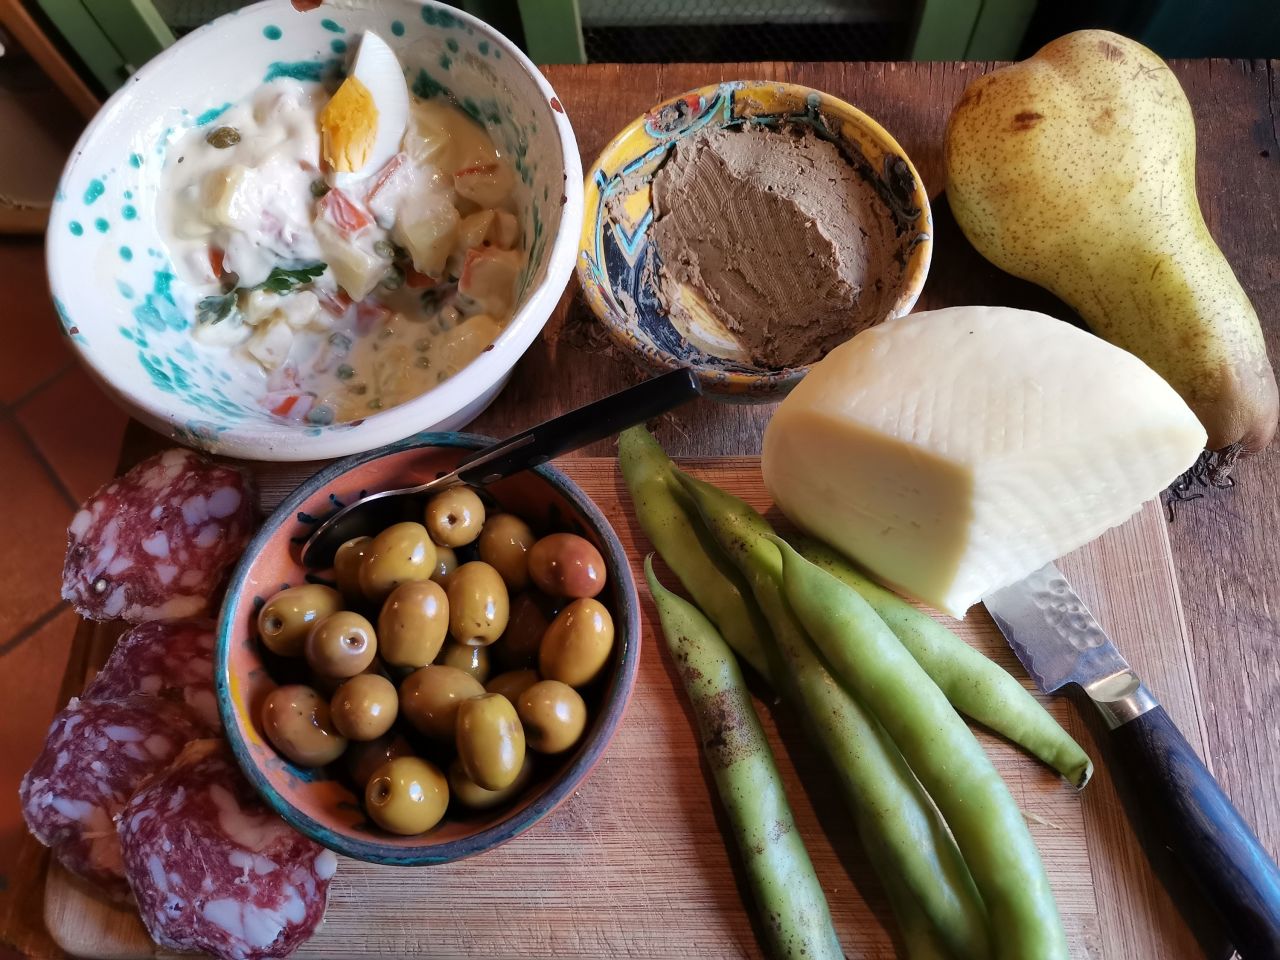 Easter in Italy is celebrated on Sunday and Monday. The Monday celebration, called Pasquetta, is often an outdoor picnic. This picnic spread includes salami, olives, insalata russa, fava beans and pecorino Romano.